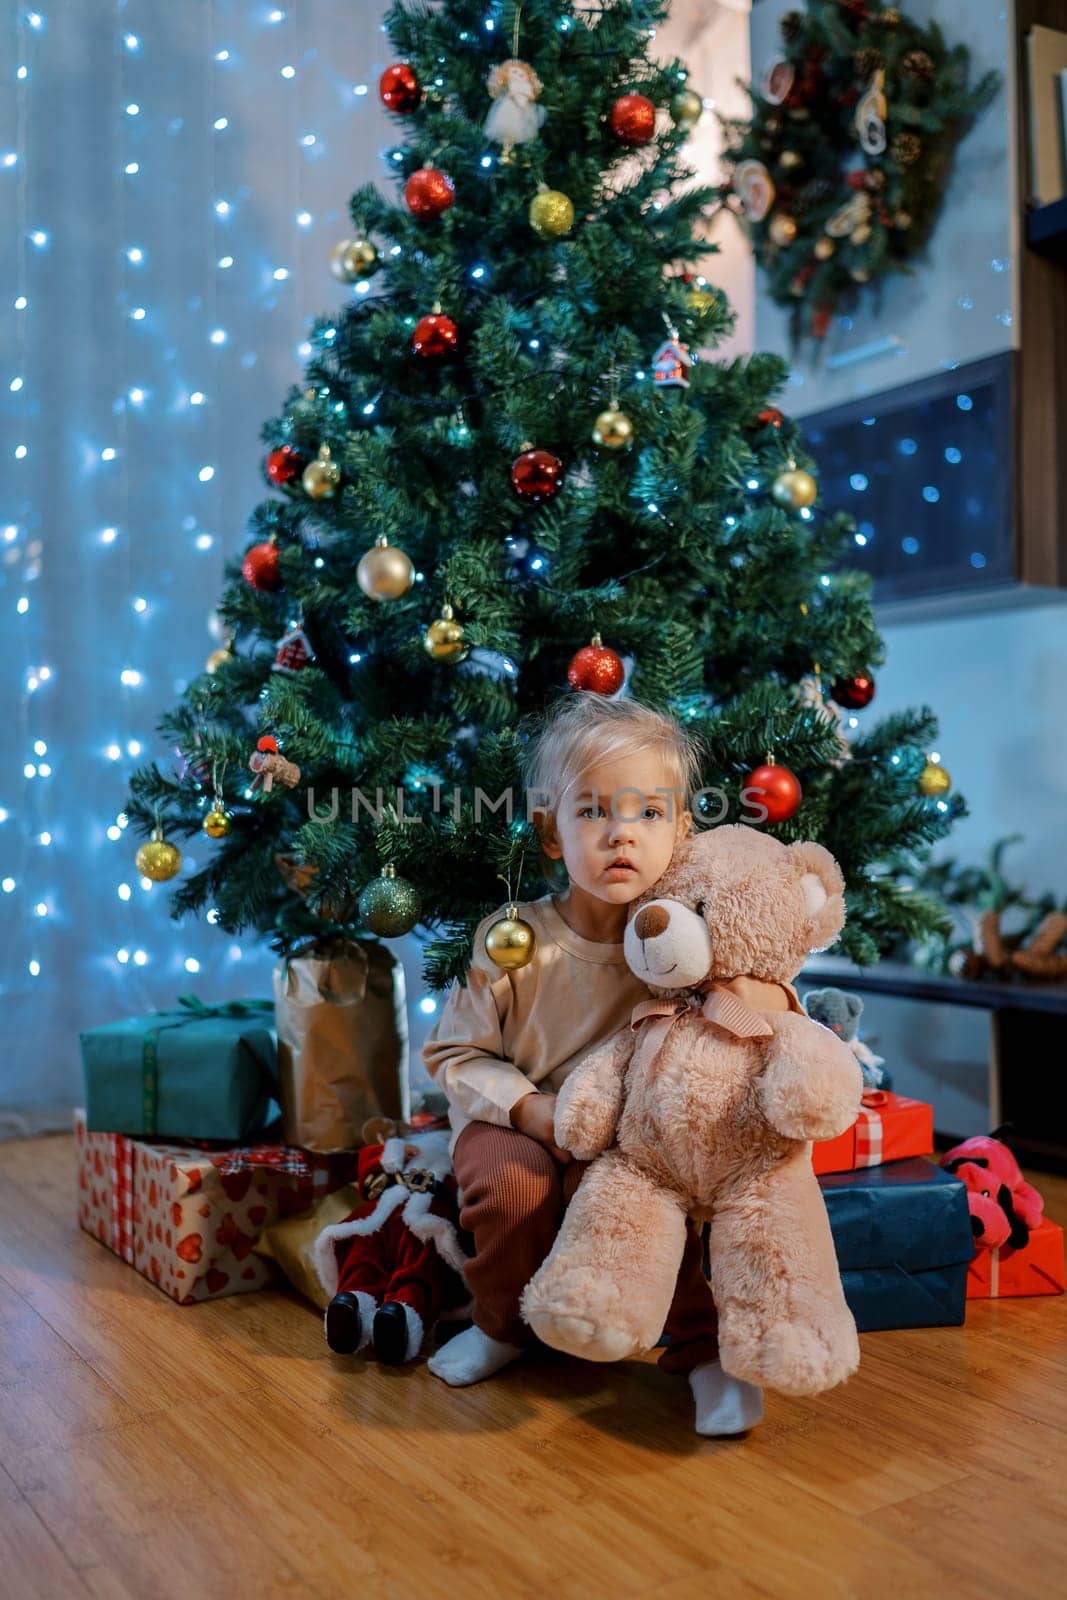 Little girl sits on gifts under the Christmas tree, hugging a teddy bear by Nadtochiy